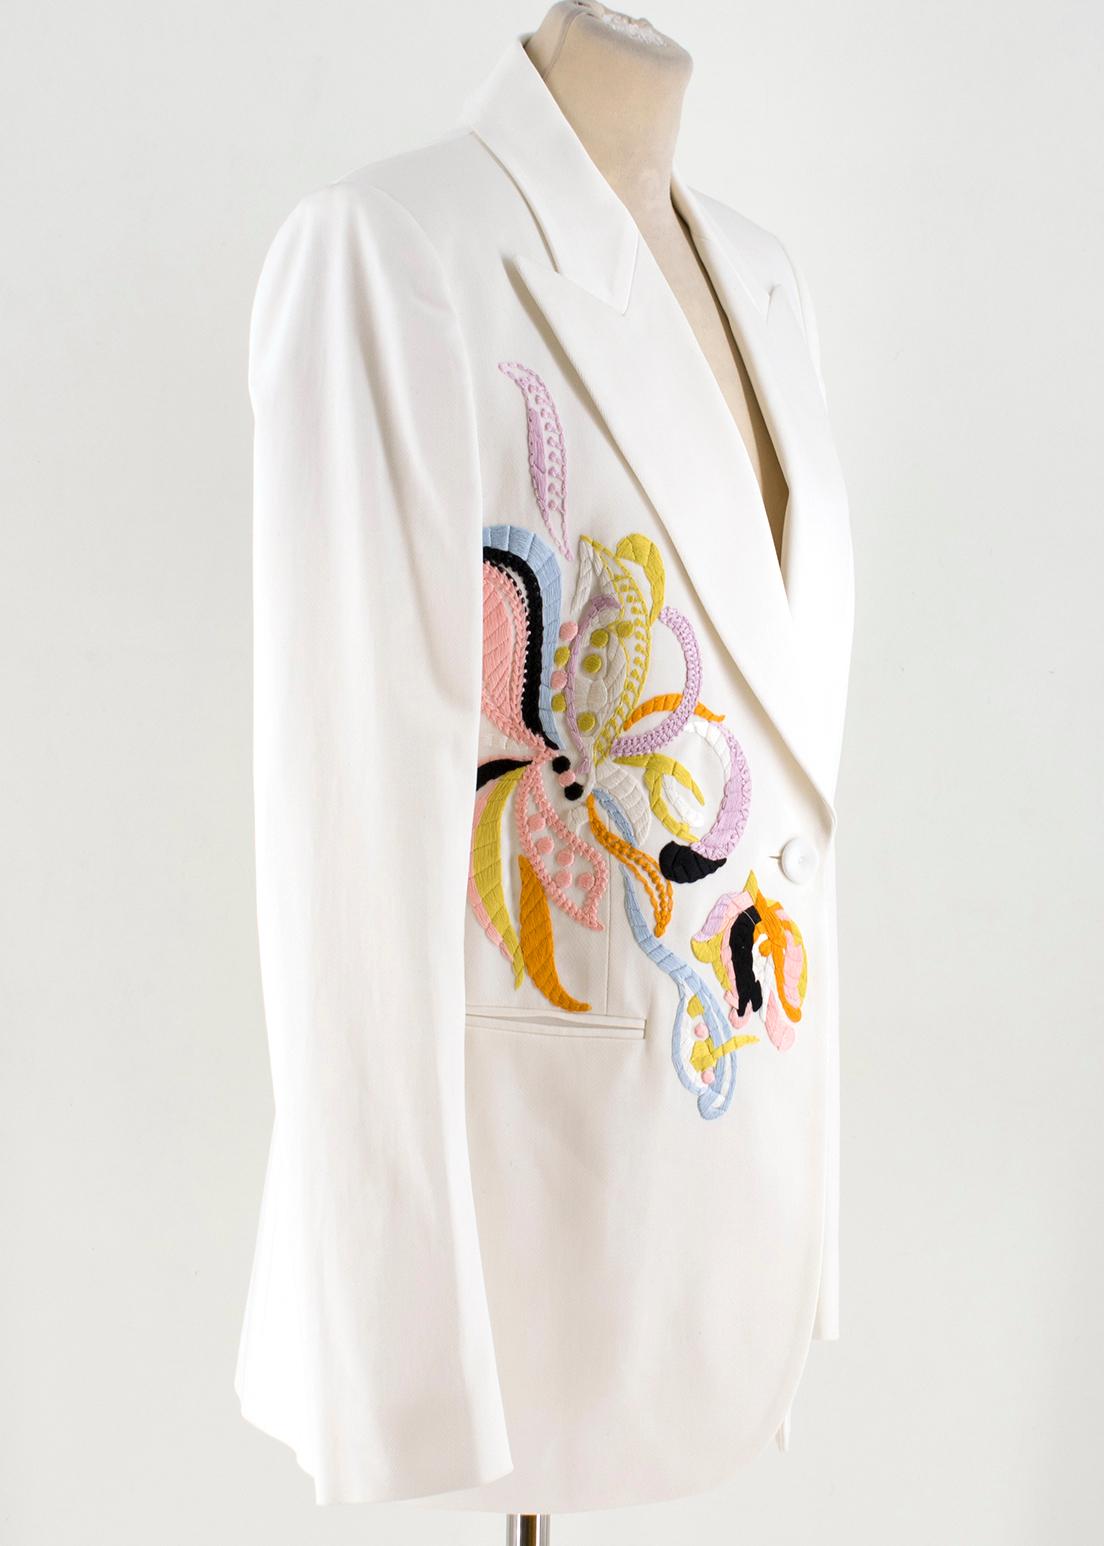 Emilio Pucci embroidered white twill blazer

- White, structured twill 
- Peak lapels, long sleeves, padded shoulders 
- Multicoloured floral hand embroidered front and back feature
- Jet pockets 
- Single breasted, one button fastening
- White